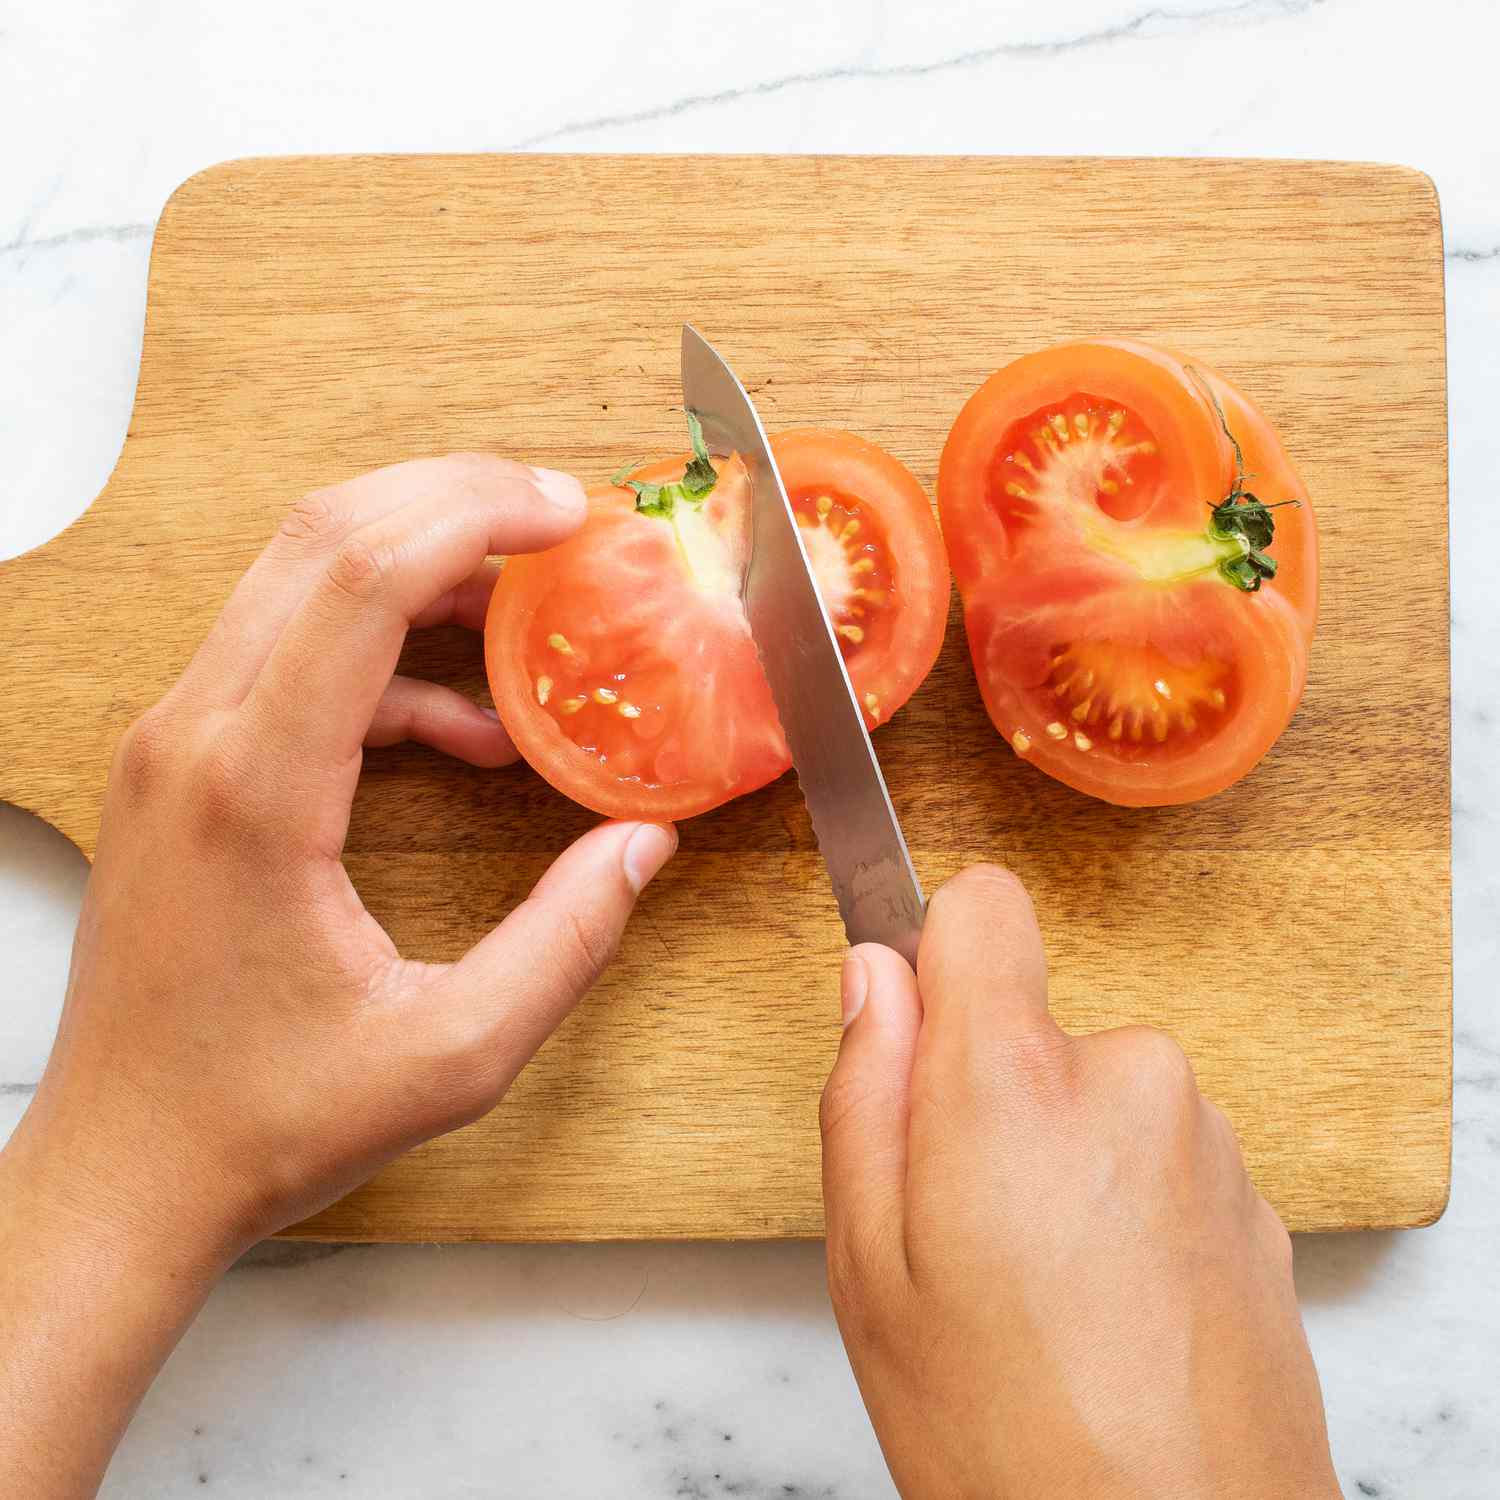 hands using a knife to cut a tomato into wedges on a wood cutting board